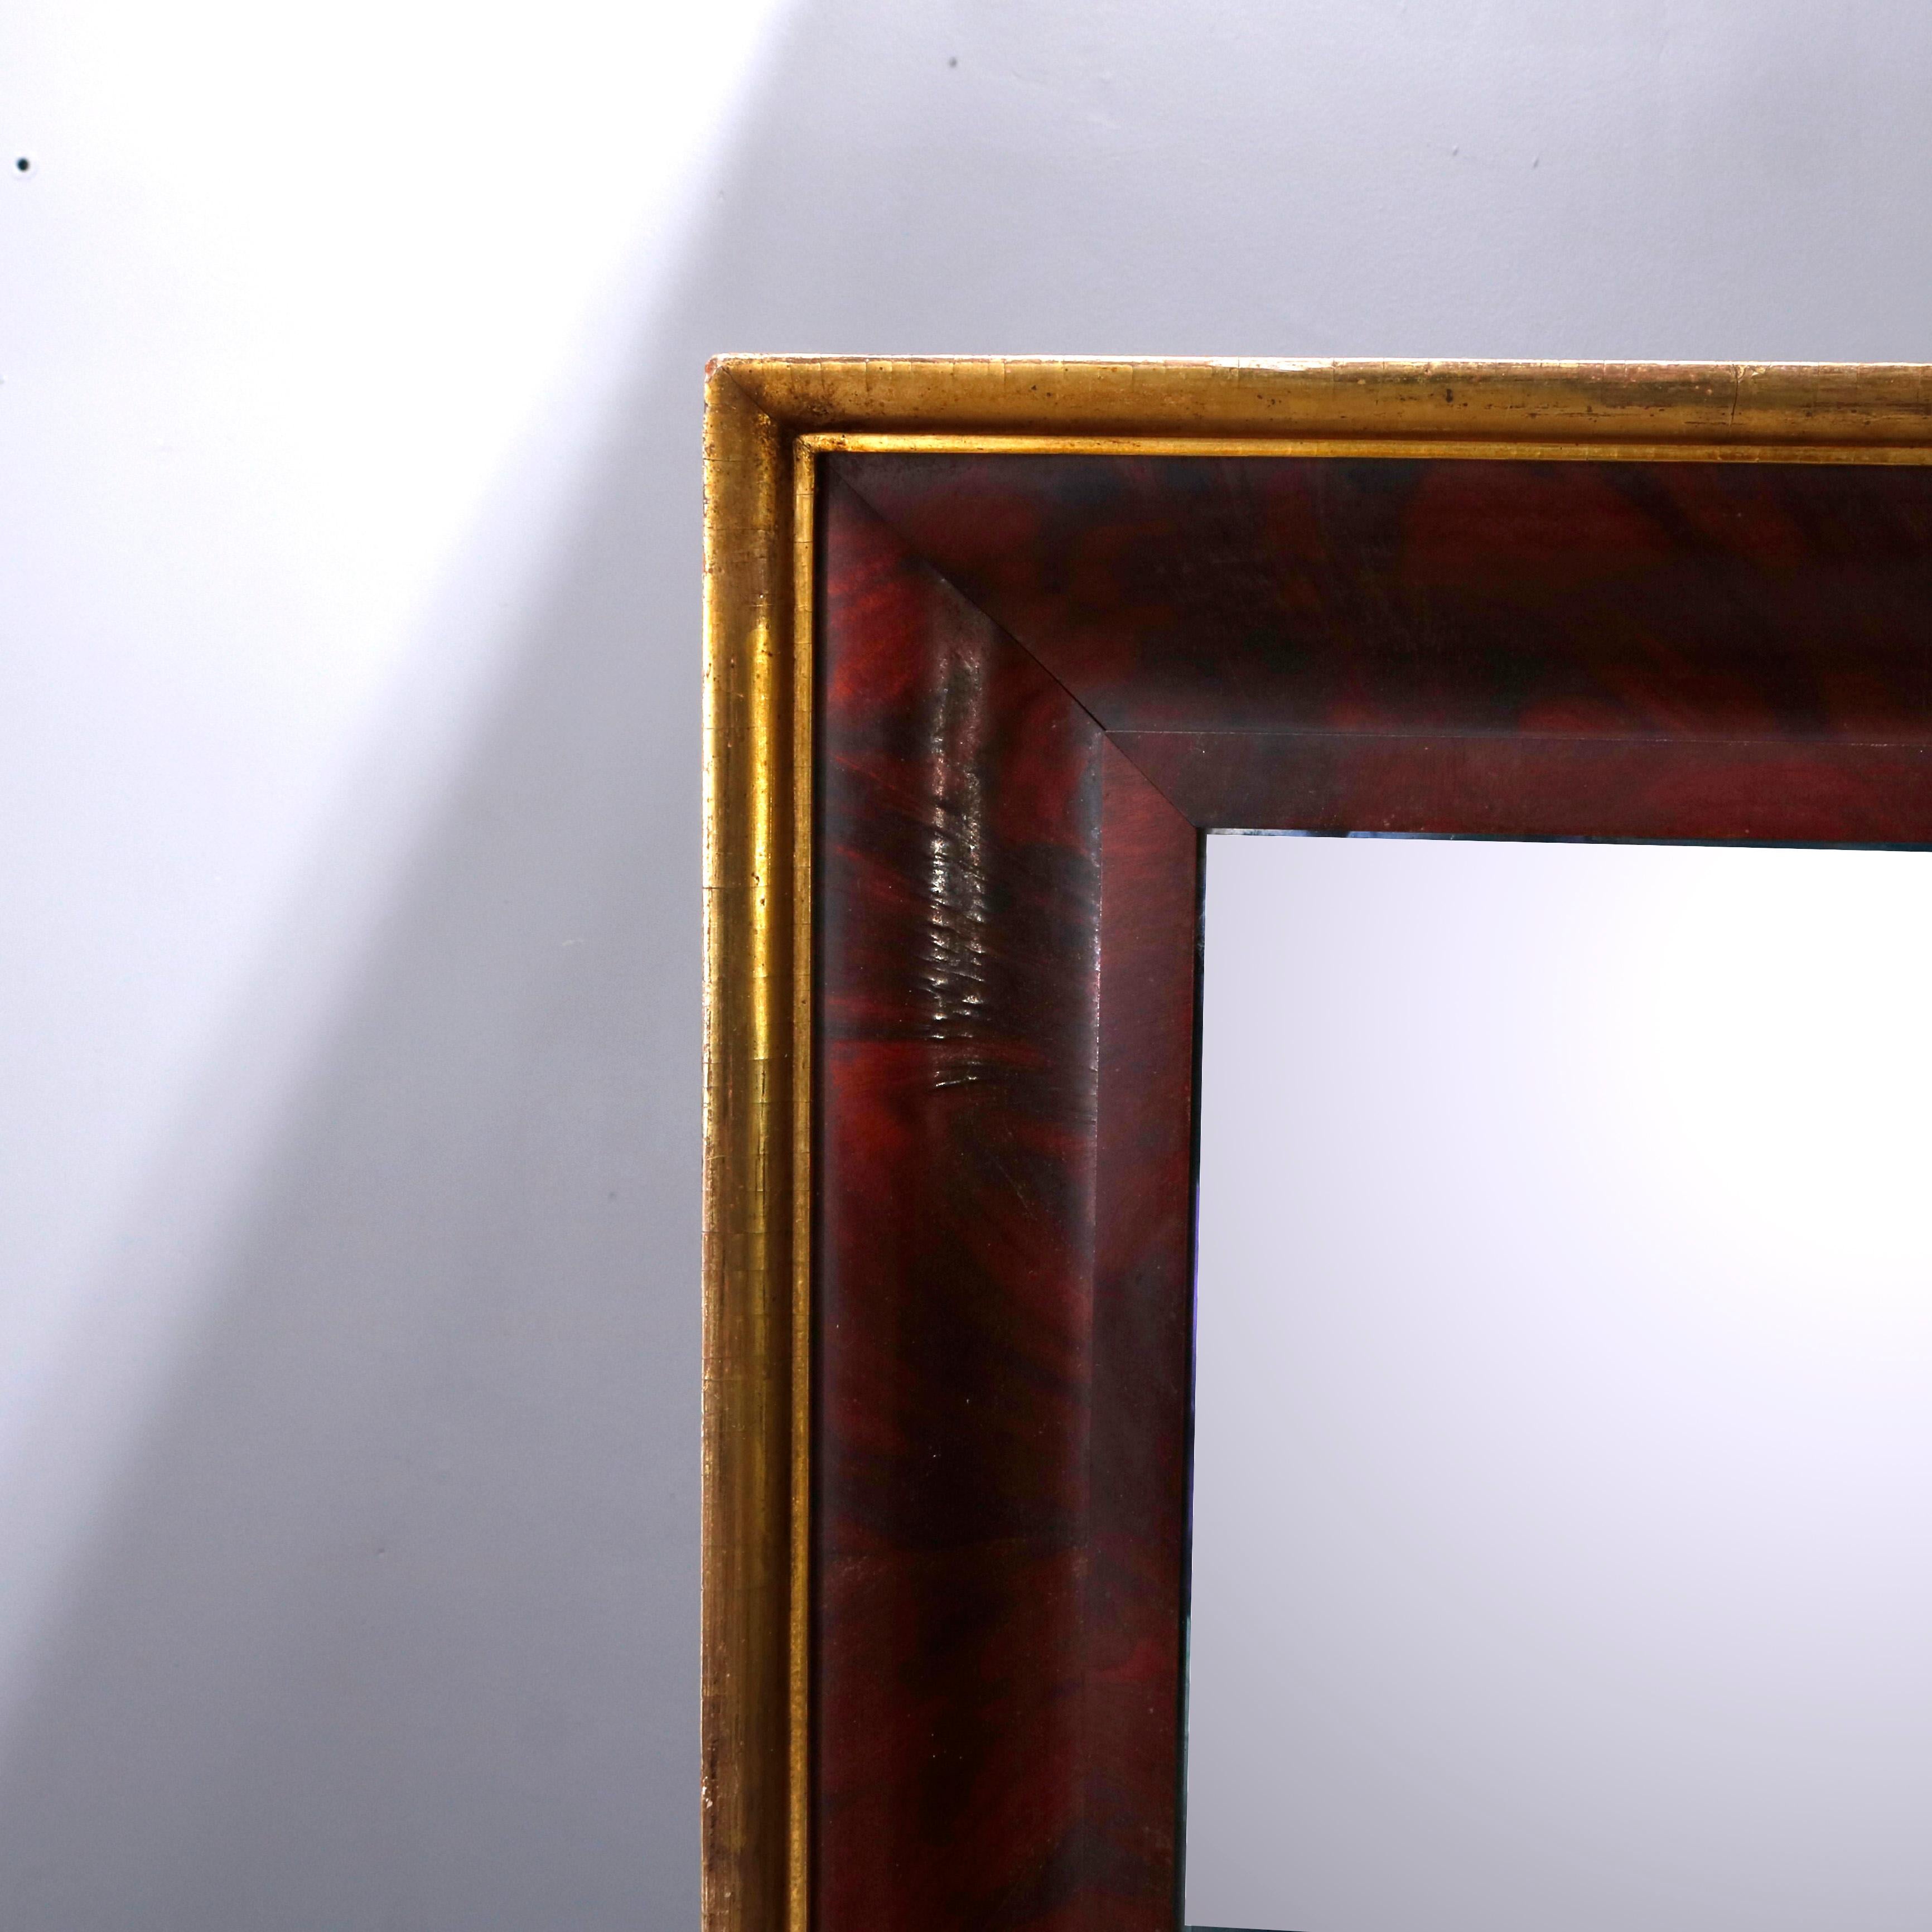 An antique American Empire trumeau wall mirror offers a flame mahogany ogee frame with gilt bordering and housing double beveled mirrors, 19th century

***DELIVERY NOTICE – Due to COVID-19 we have employed LIMITED-TO-NO-CONTACT PRACTICES in the